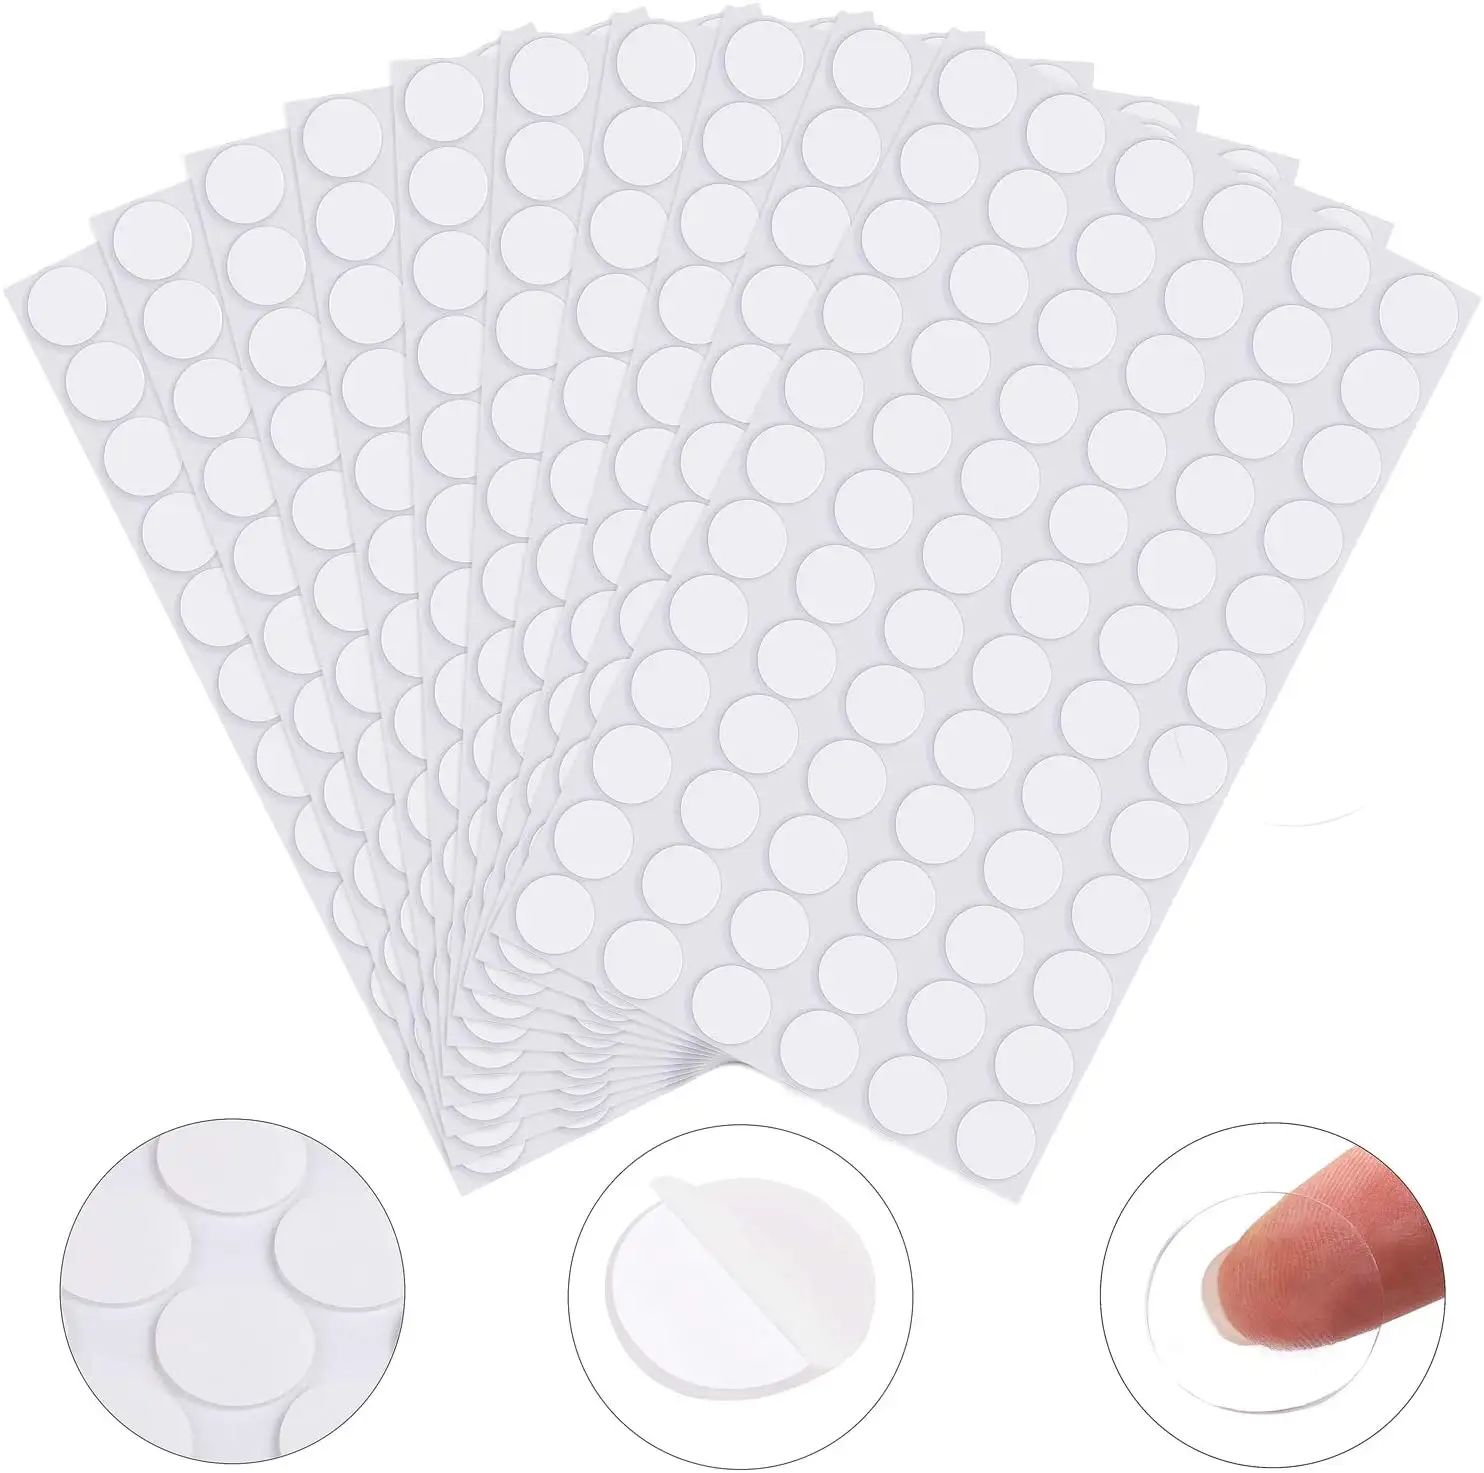 Clear Round Adhesive Dots Double Sided Adhesive Pad Sheet Tape